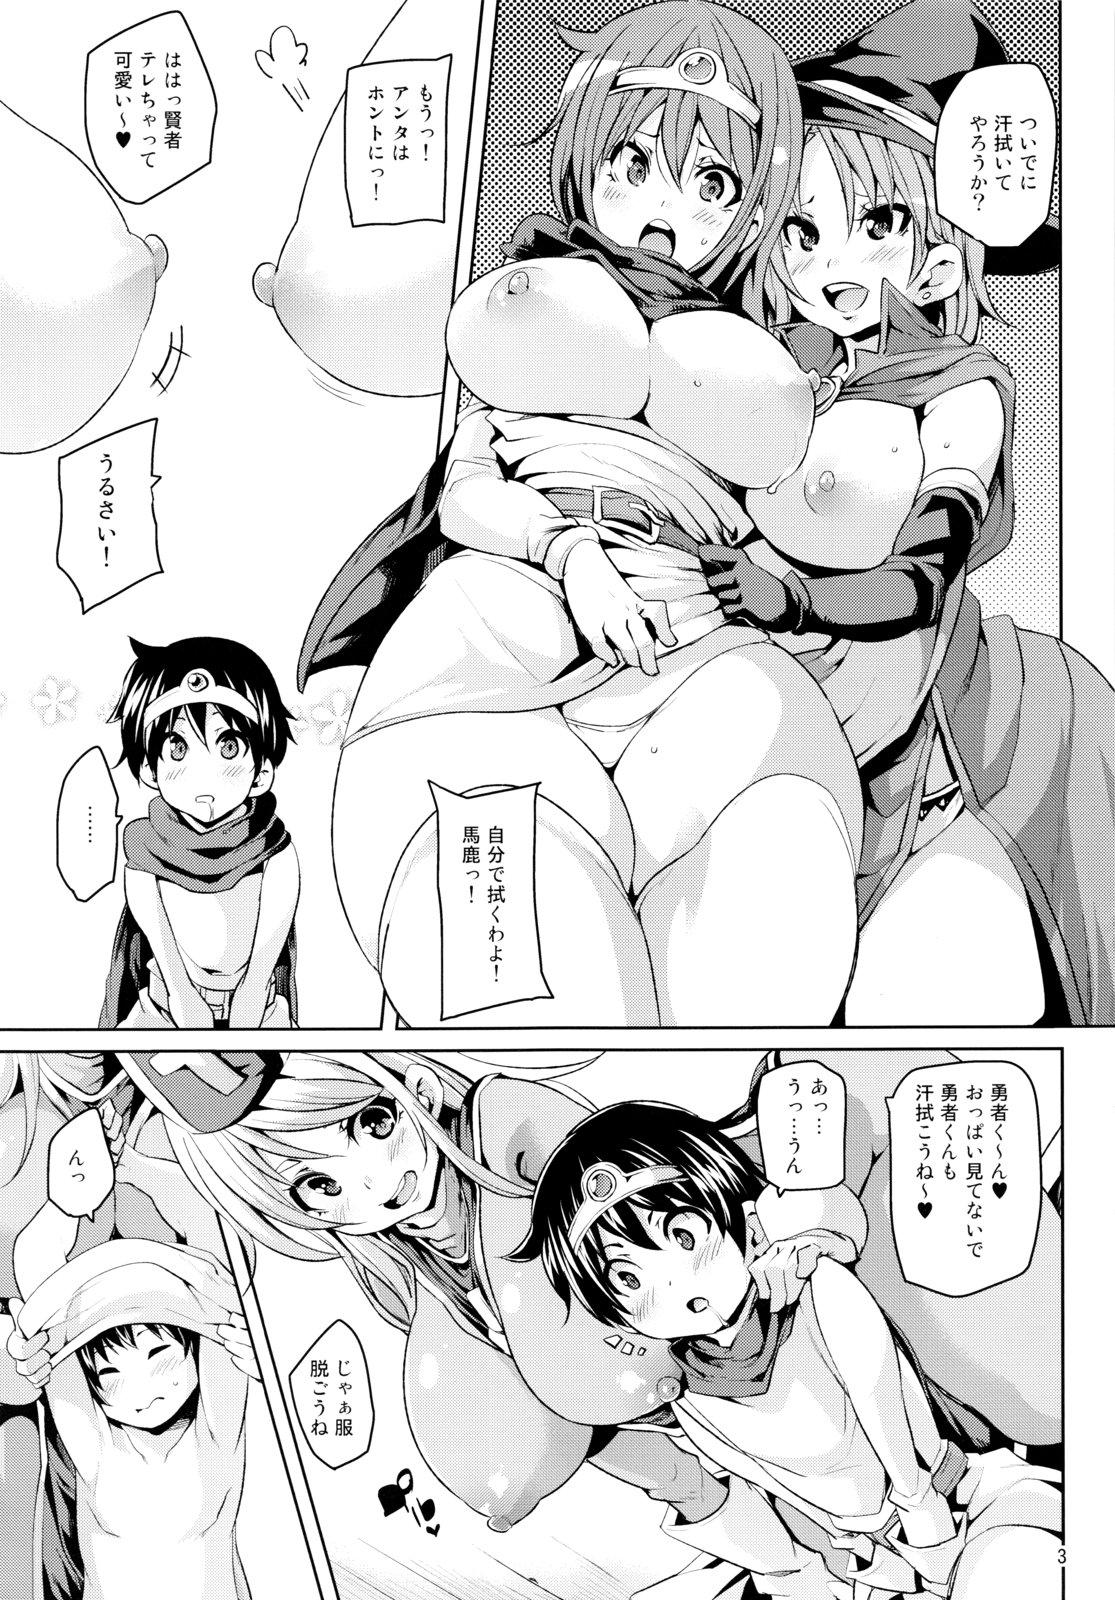 Ass Dara Que - Dragon quest iii Gay Orgy - Page 4